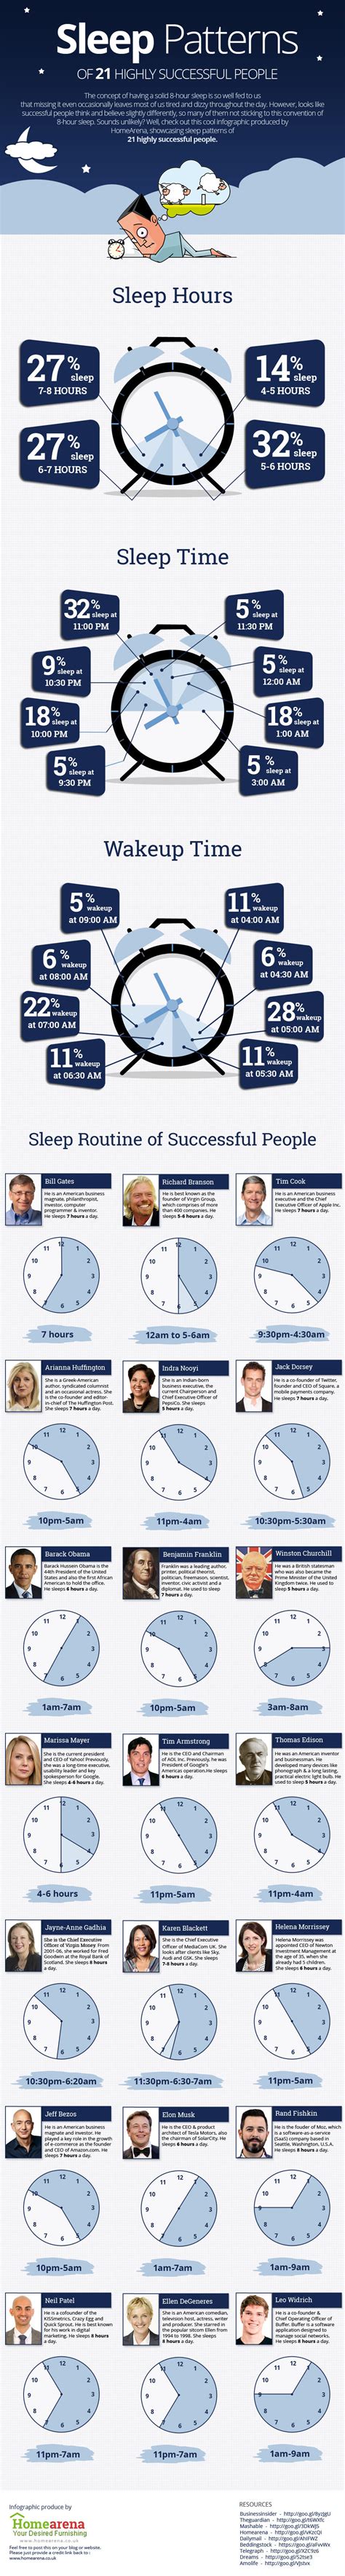 How Do Successful Peoples Sleep Patterns Compare To The Average